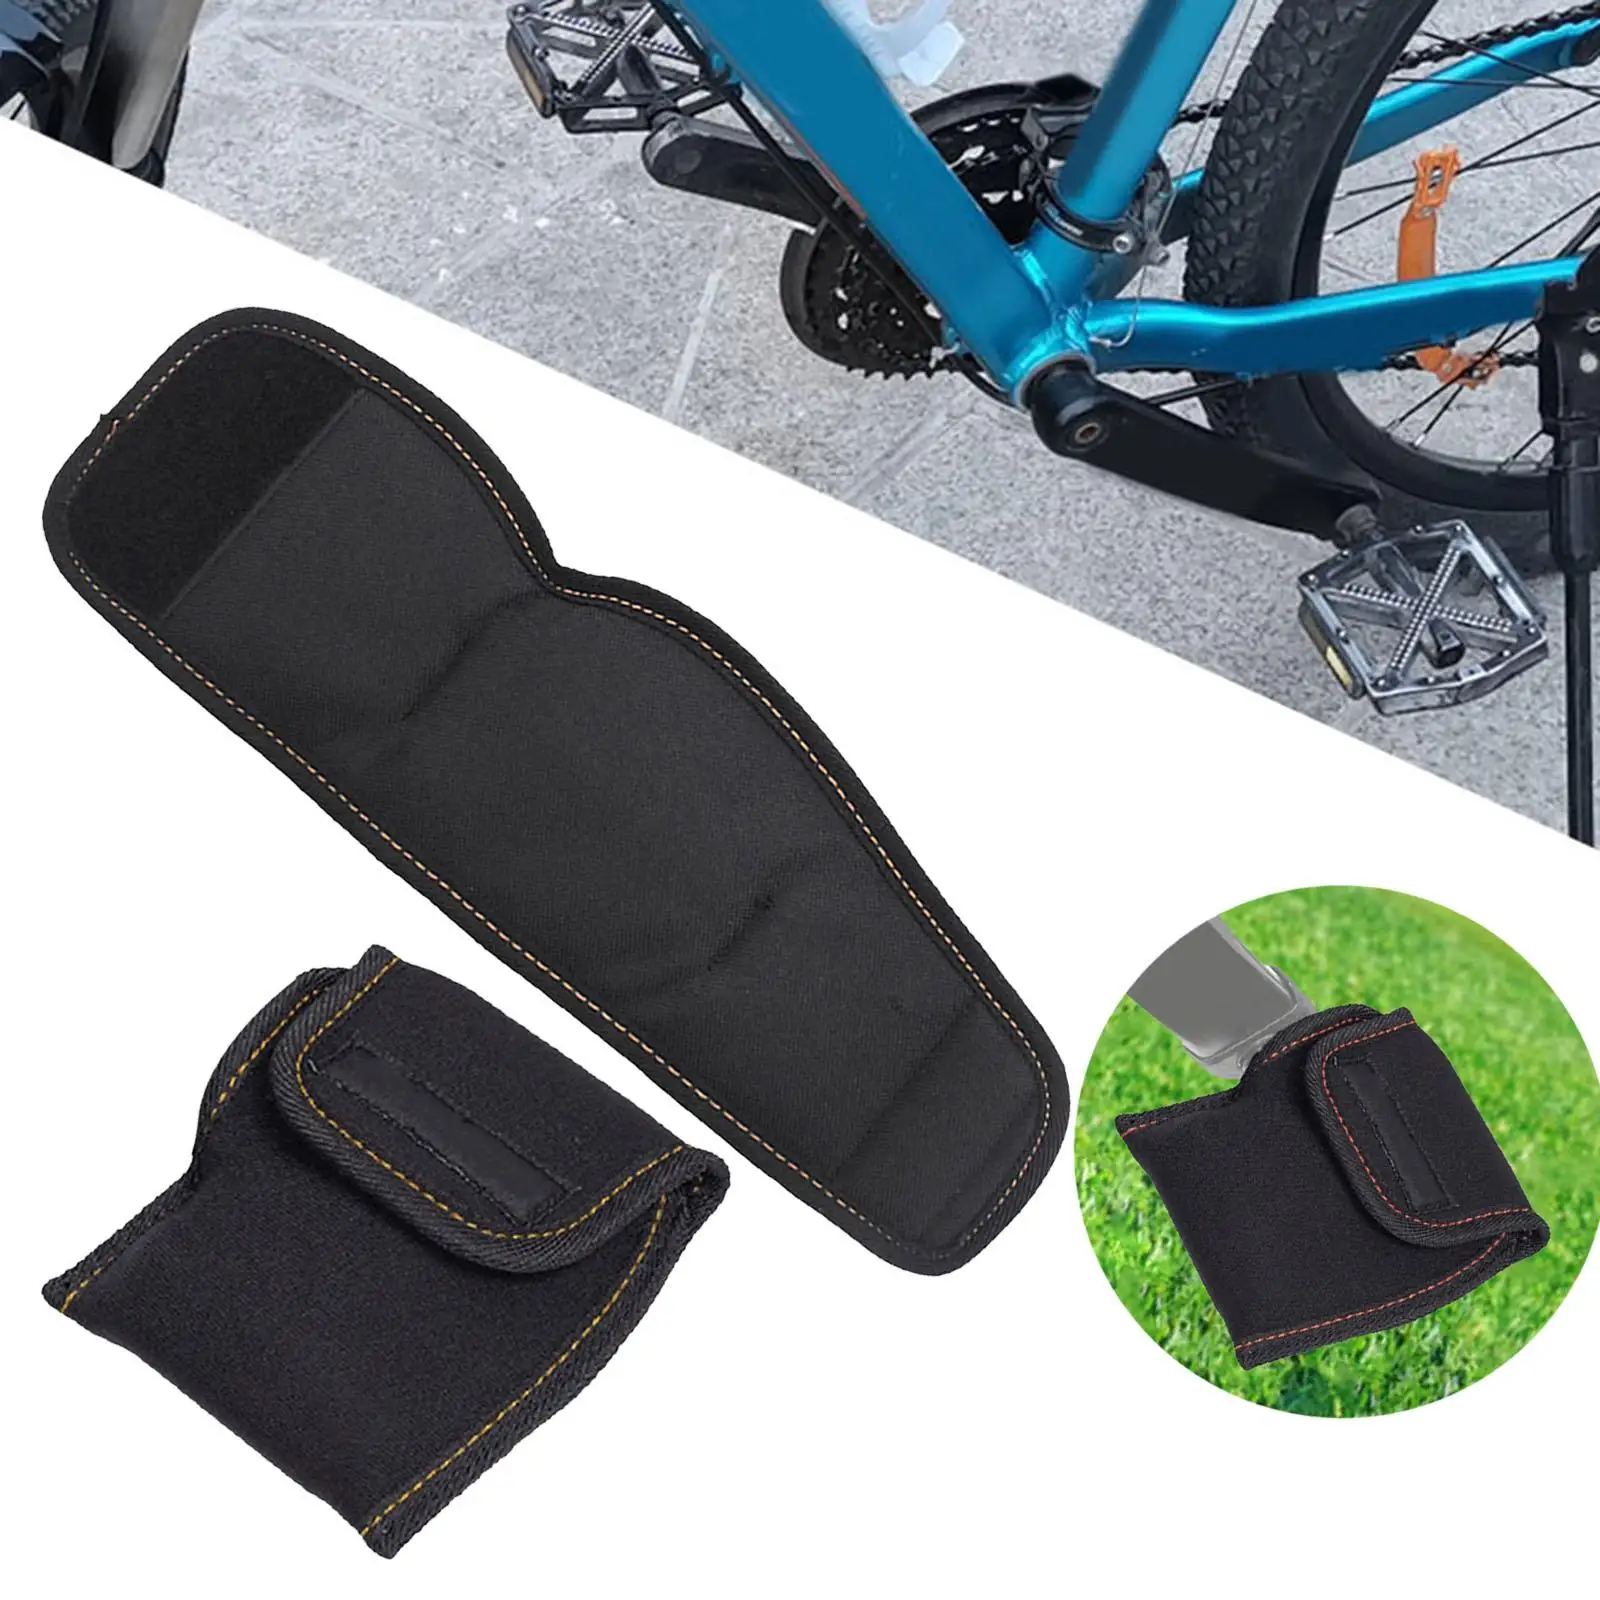 1 Pair Bike Pedal Protective Cover Oxford Cloth Cleat Sleeves for Riding